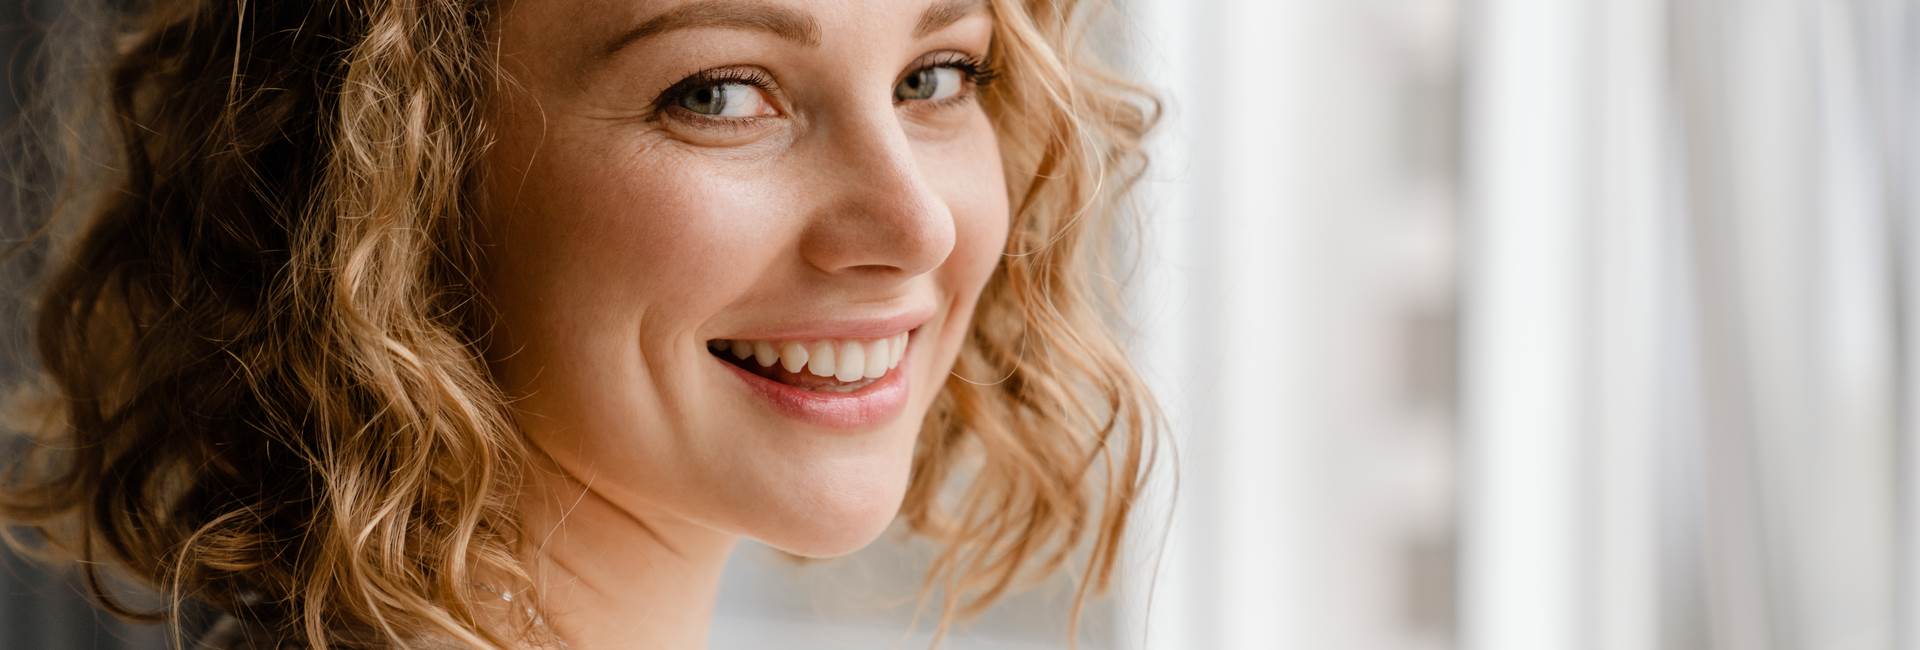 Beautiful woman smiling after Preventative Dentistry